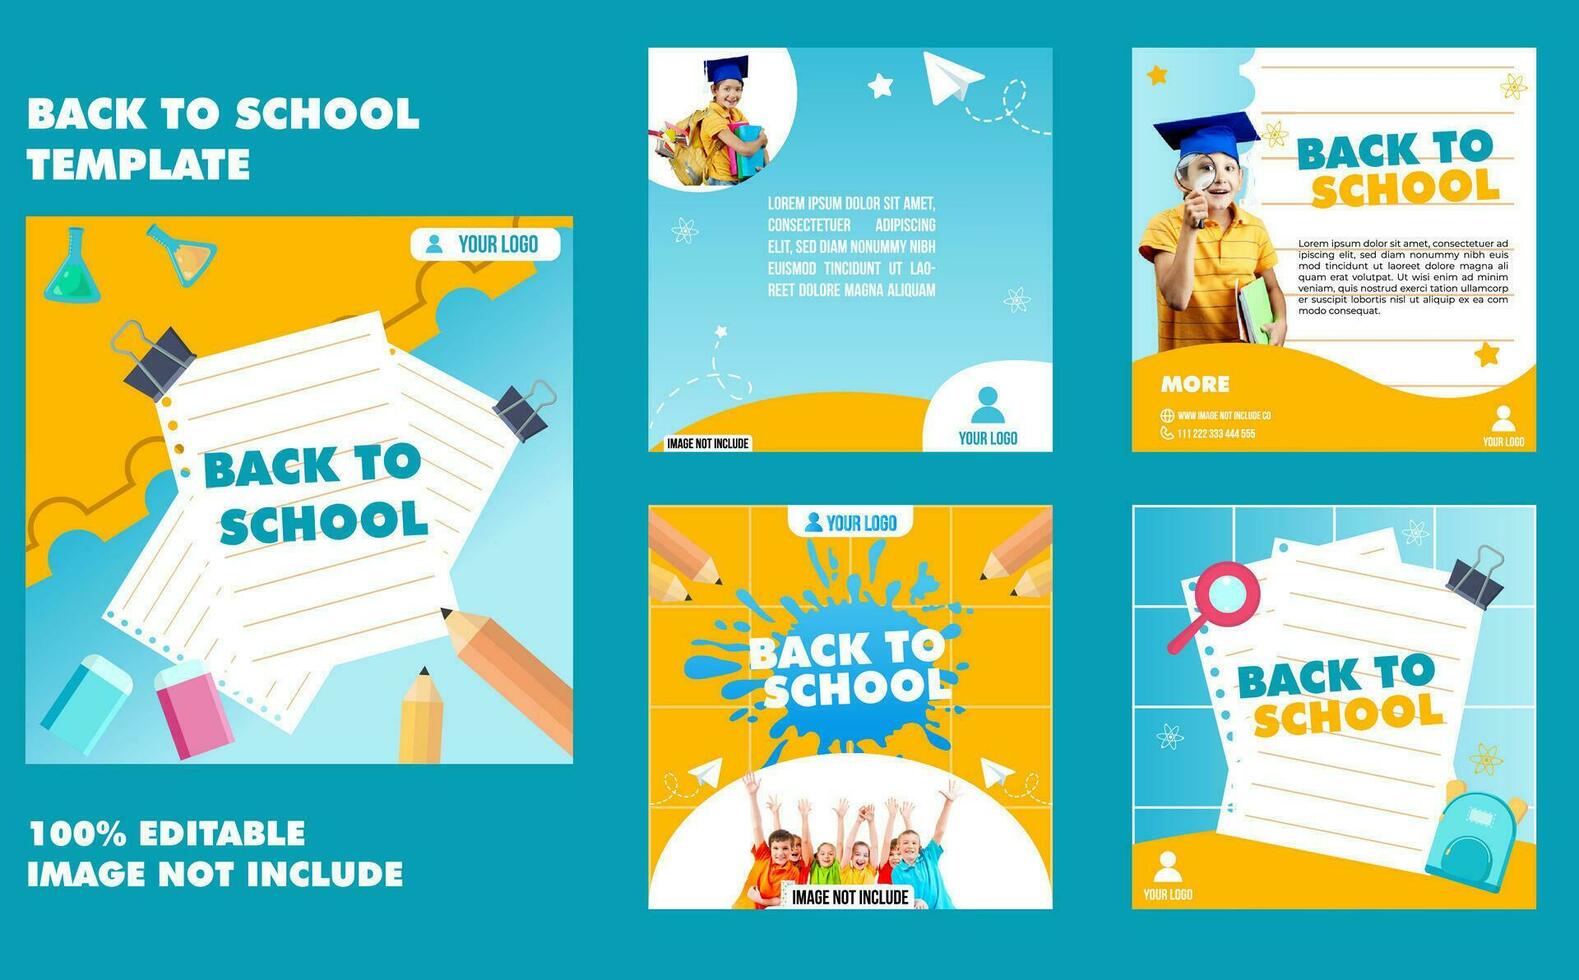 Back To school feed instagram template vector